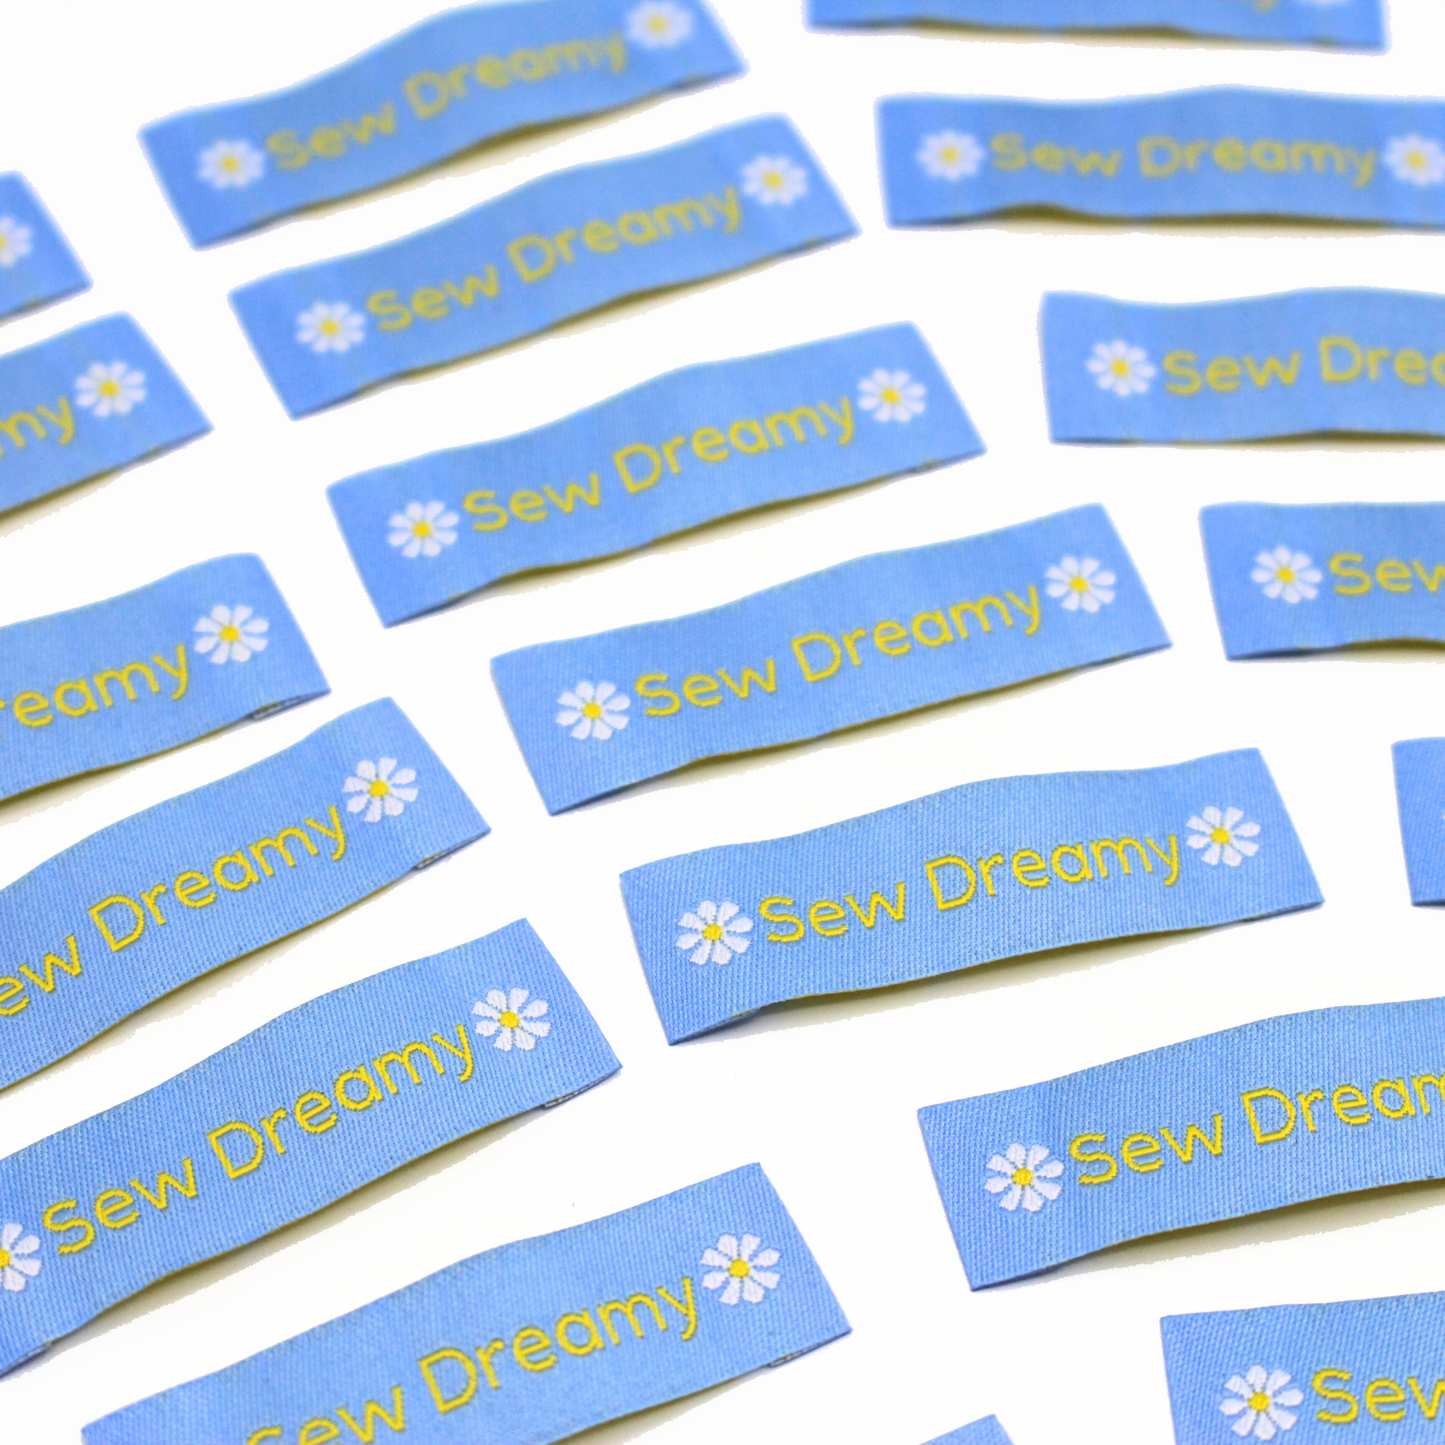 Sew Dreamy Daisy | Woven Sew In Labels